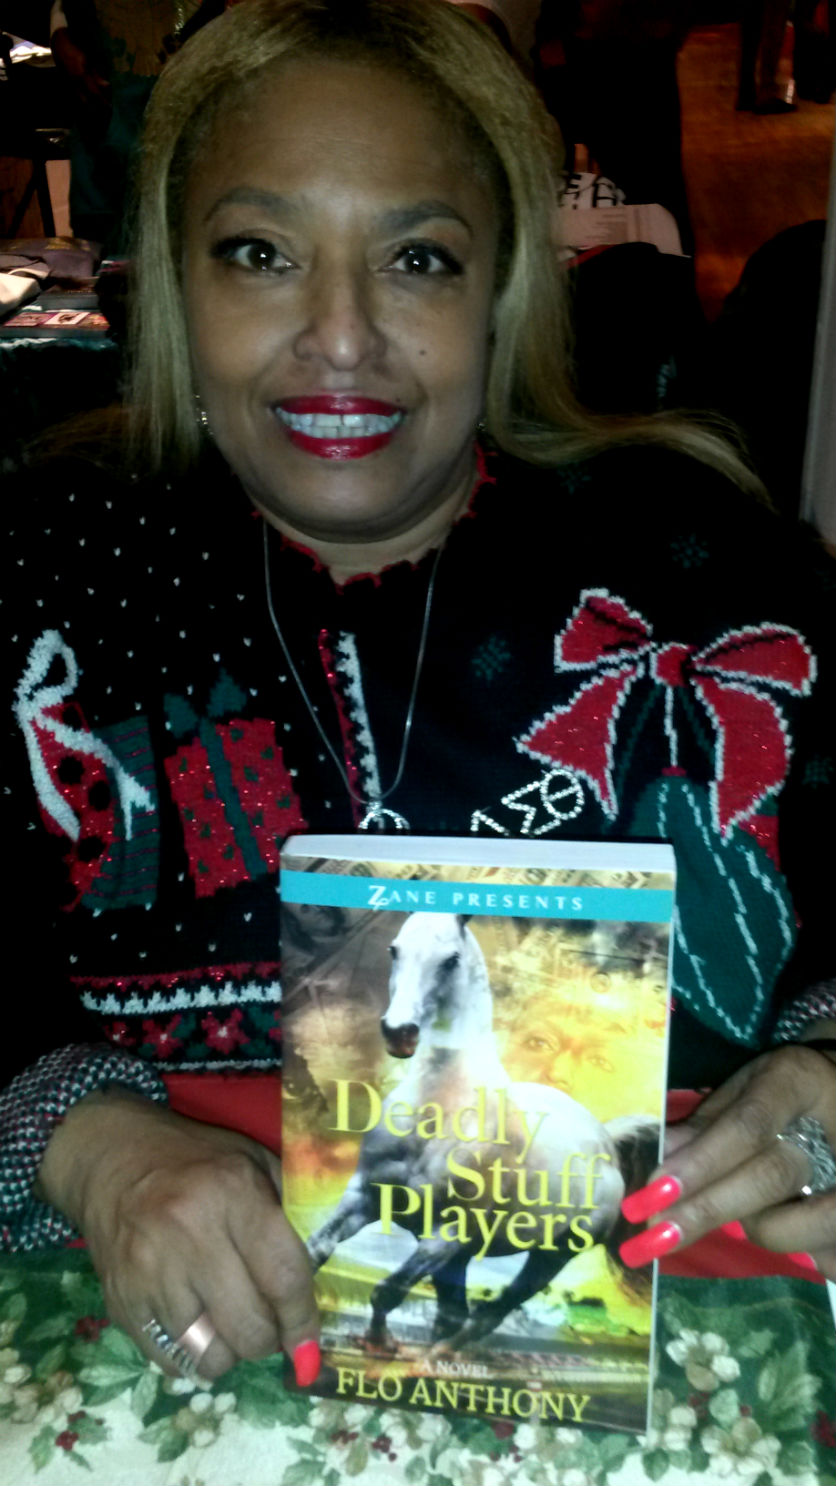 Ms. Flo Anthony of TV1 notoriety here at Black Expo with her second tome Deadly Stuff Players a blac